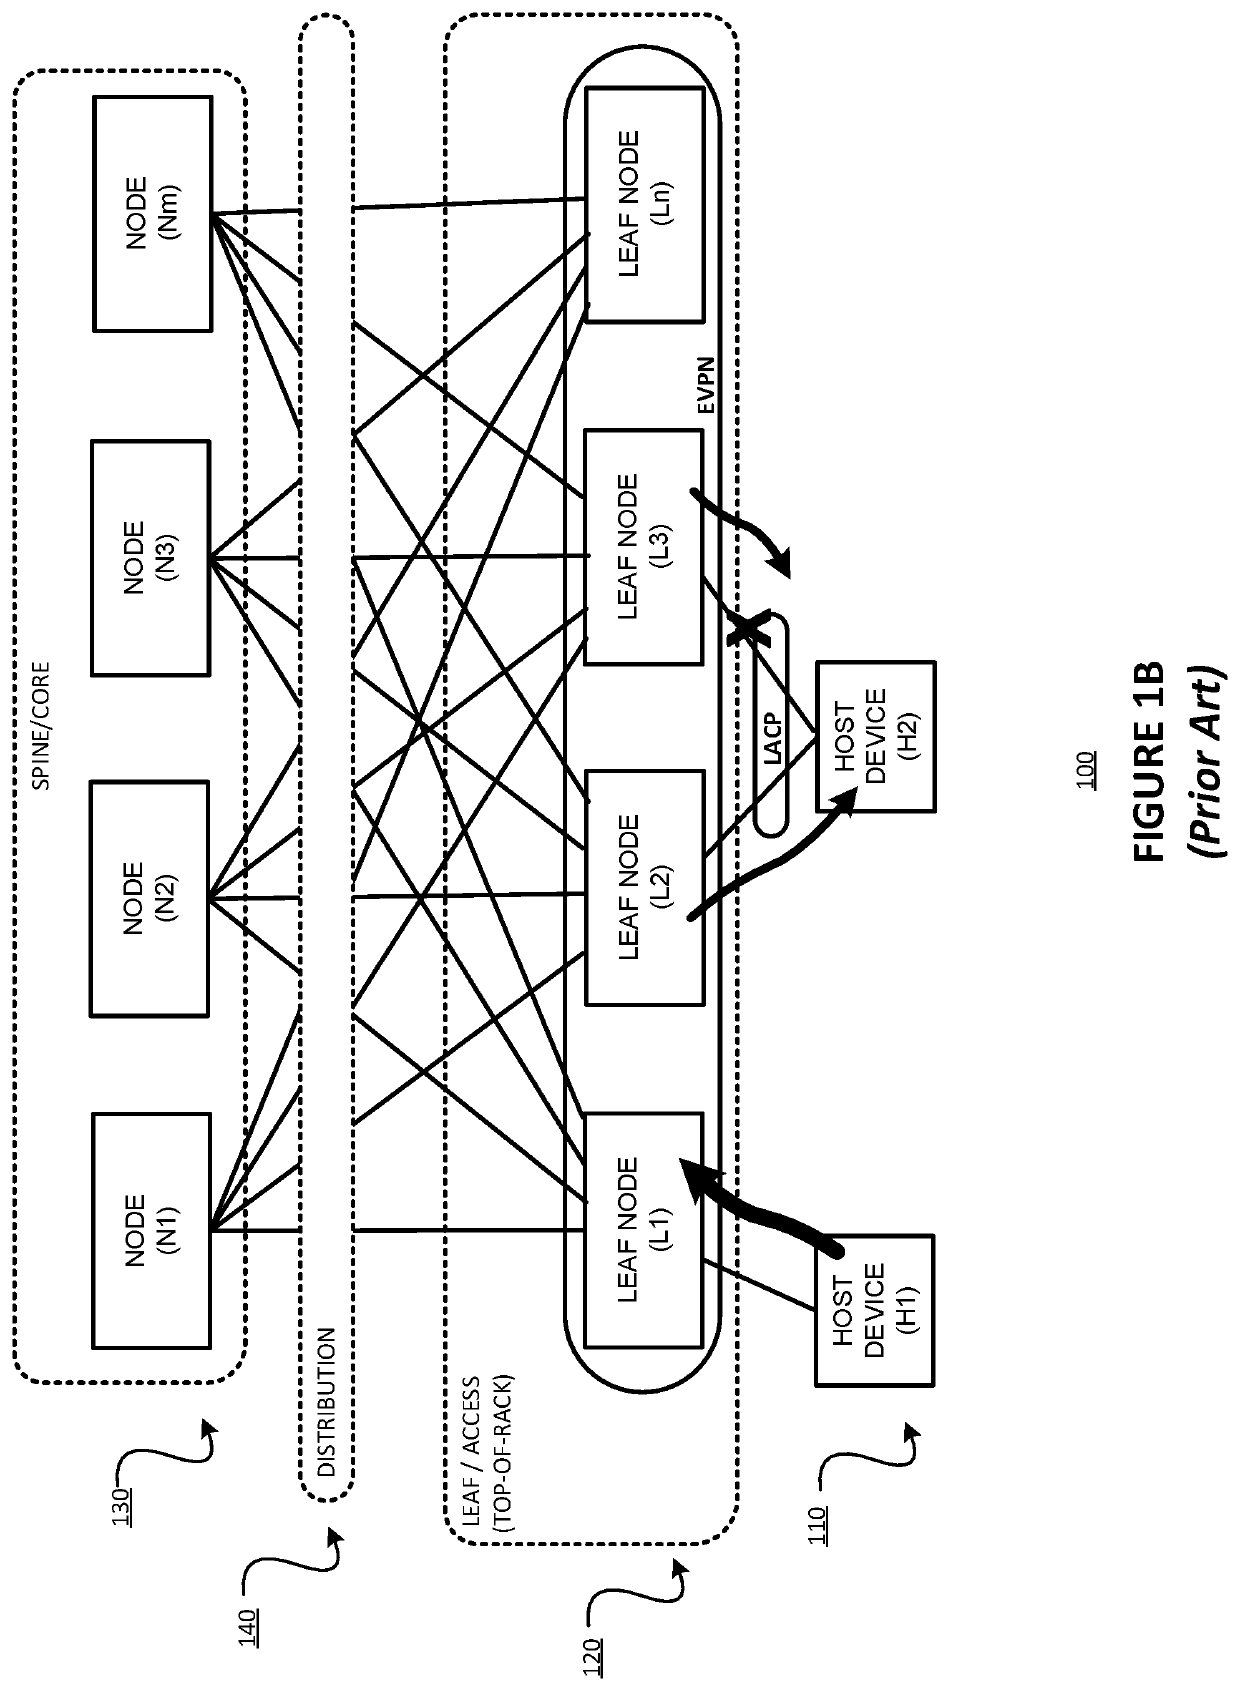 Faster fault-detection mechanism, for example using bidirectional forwarding detection (BFD), on network nodes and/or hosts multihomed using a link aggregation group (LAG)